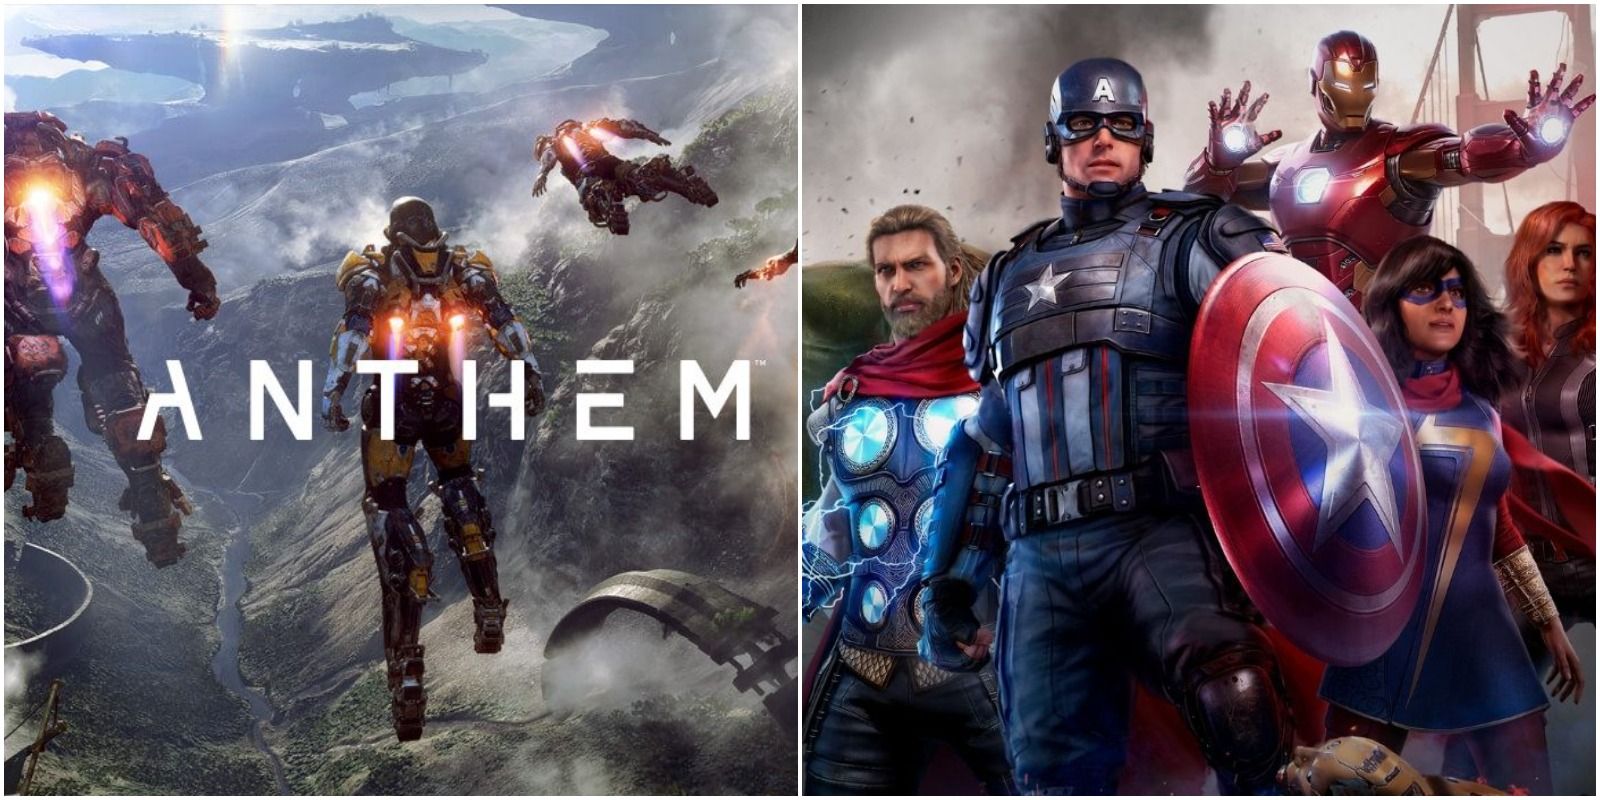 EA and BioWare's Anthem, and Square Enix and Crystal Dynamics' Marvel's Avengers